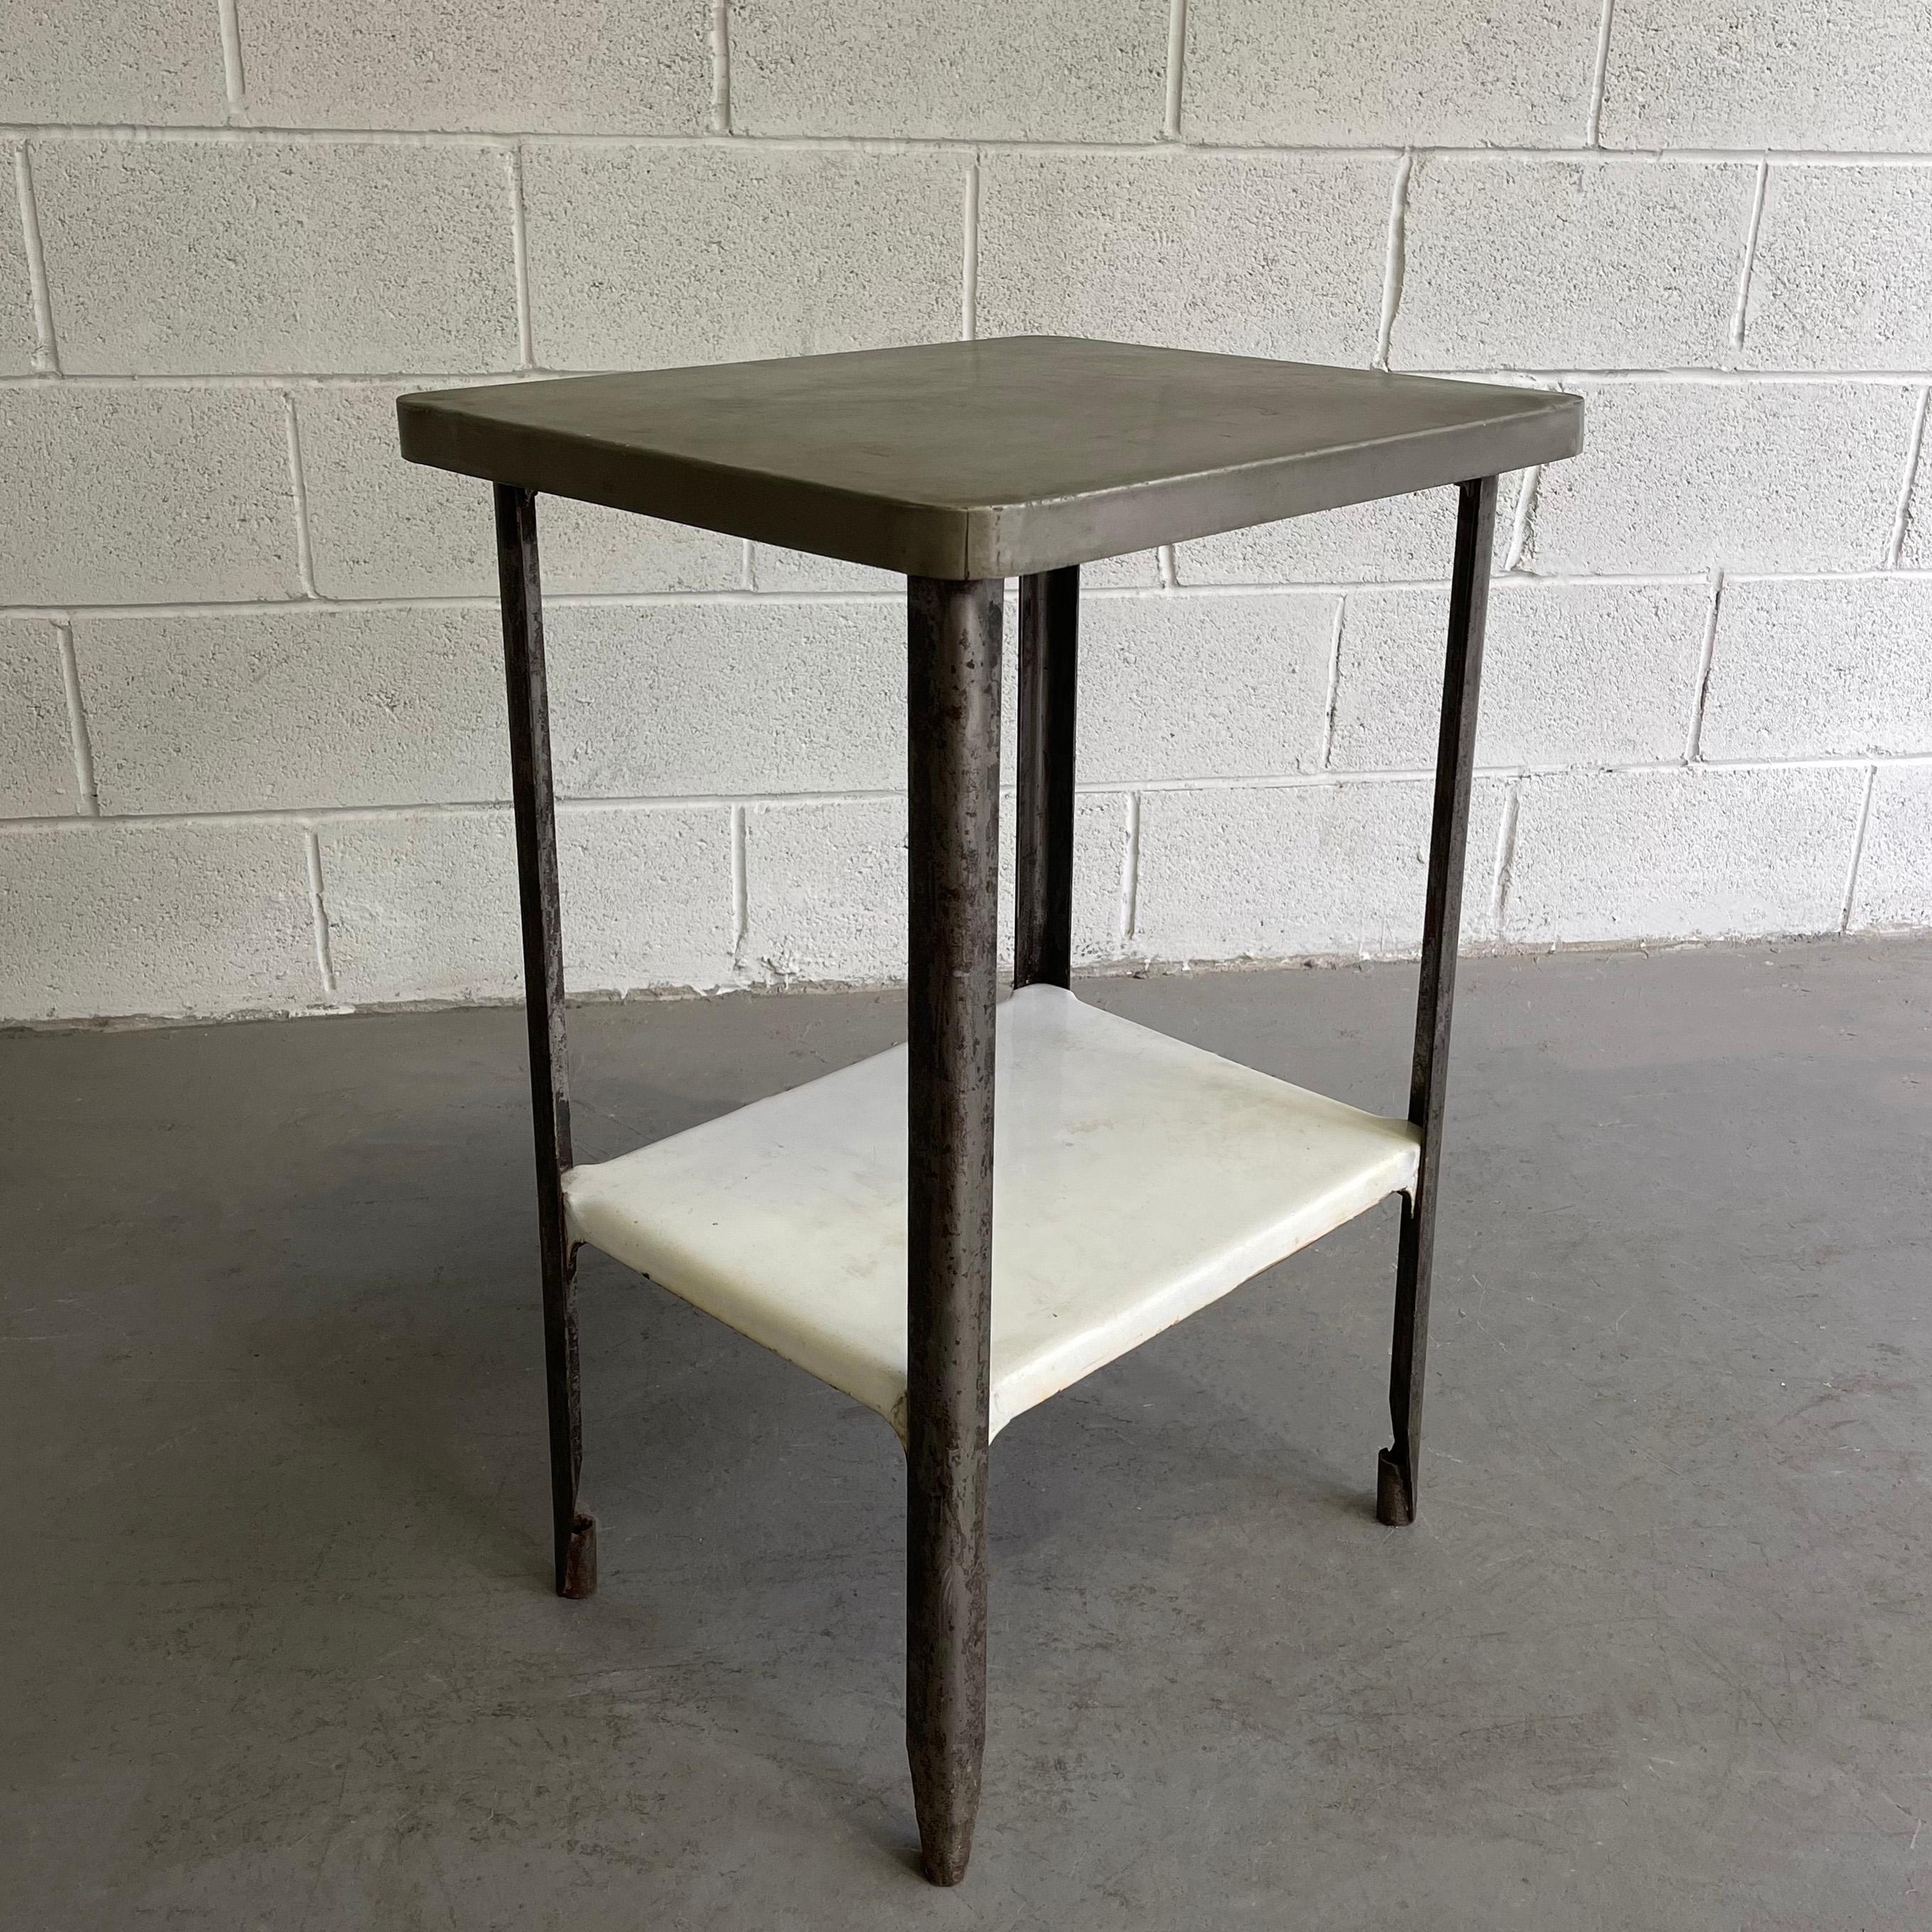 Antique Industrial Apothecary Prep Table In Good Condition For Sale In Brooklyn, NY